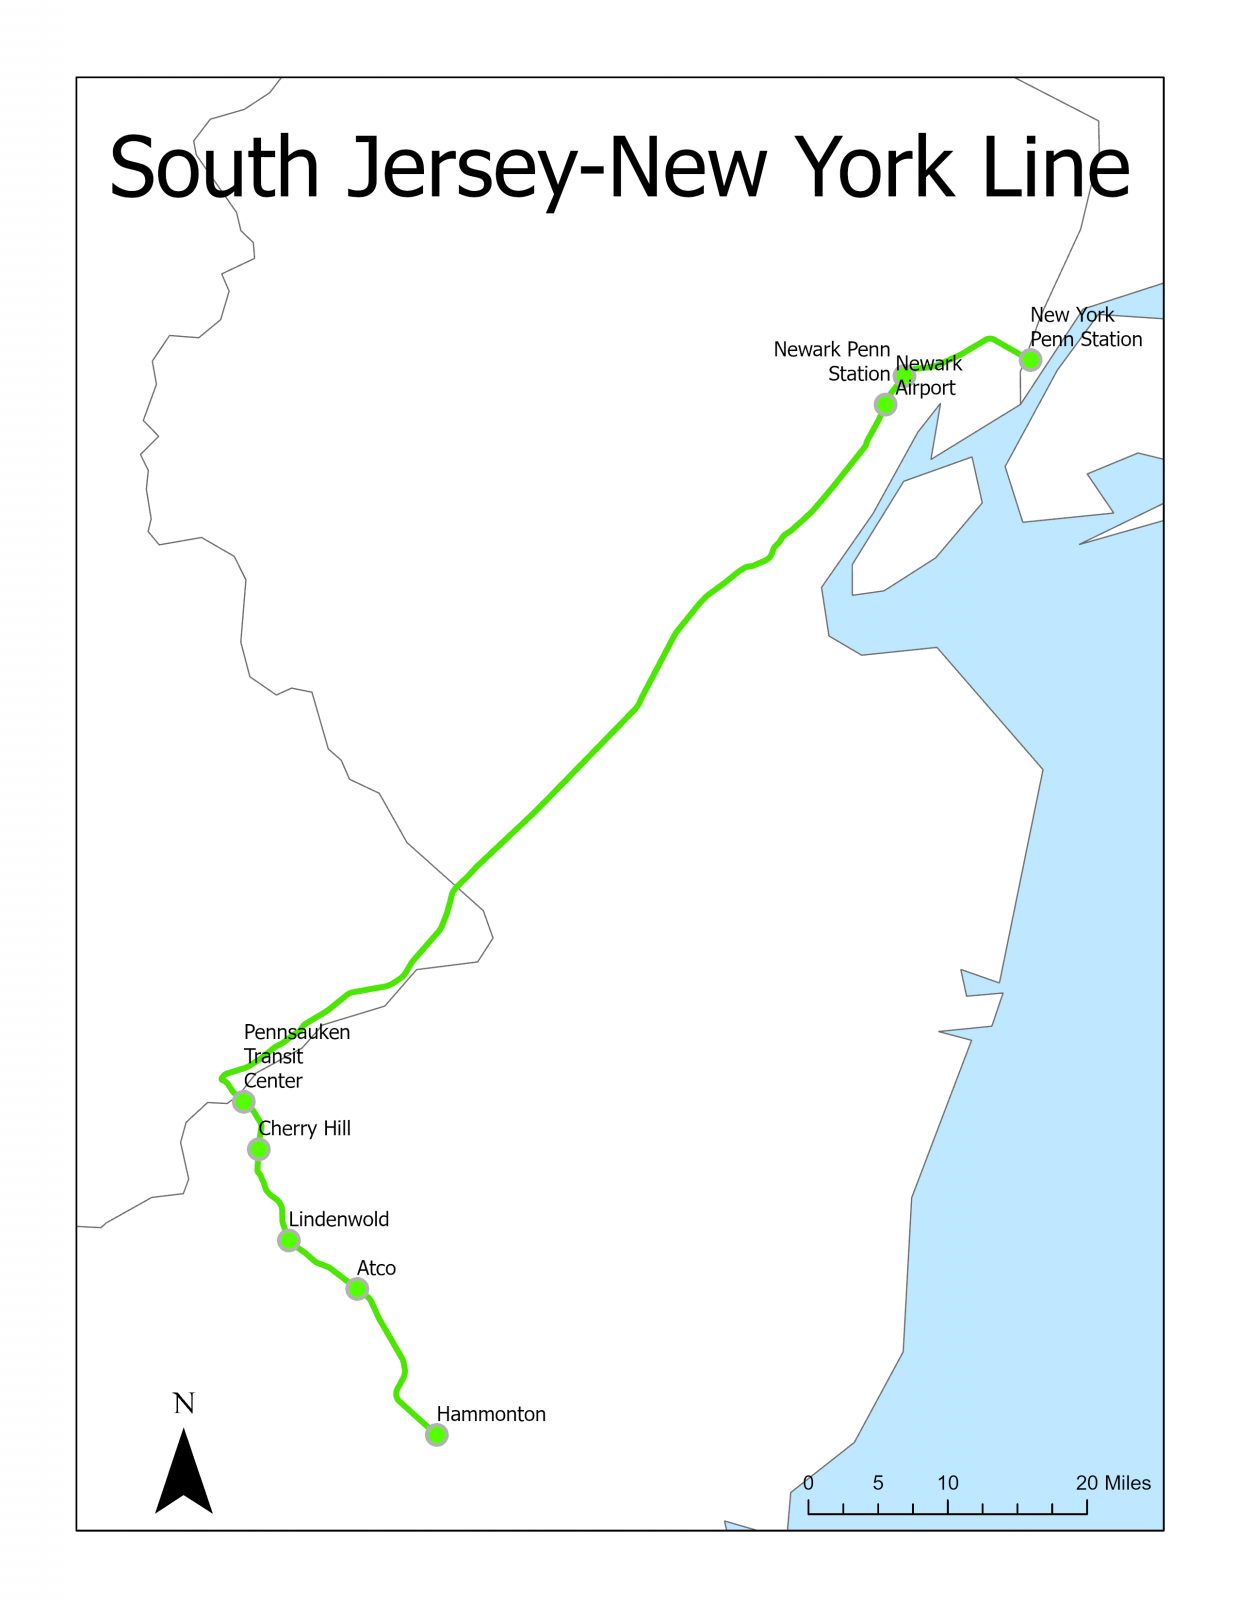 South Jersey-New York Line.png